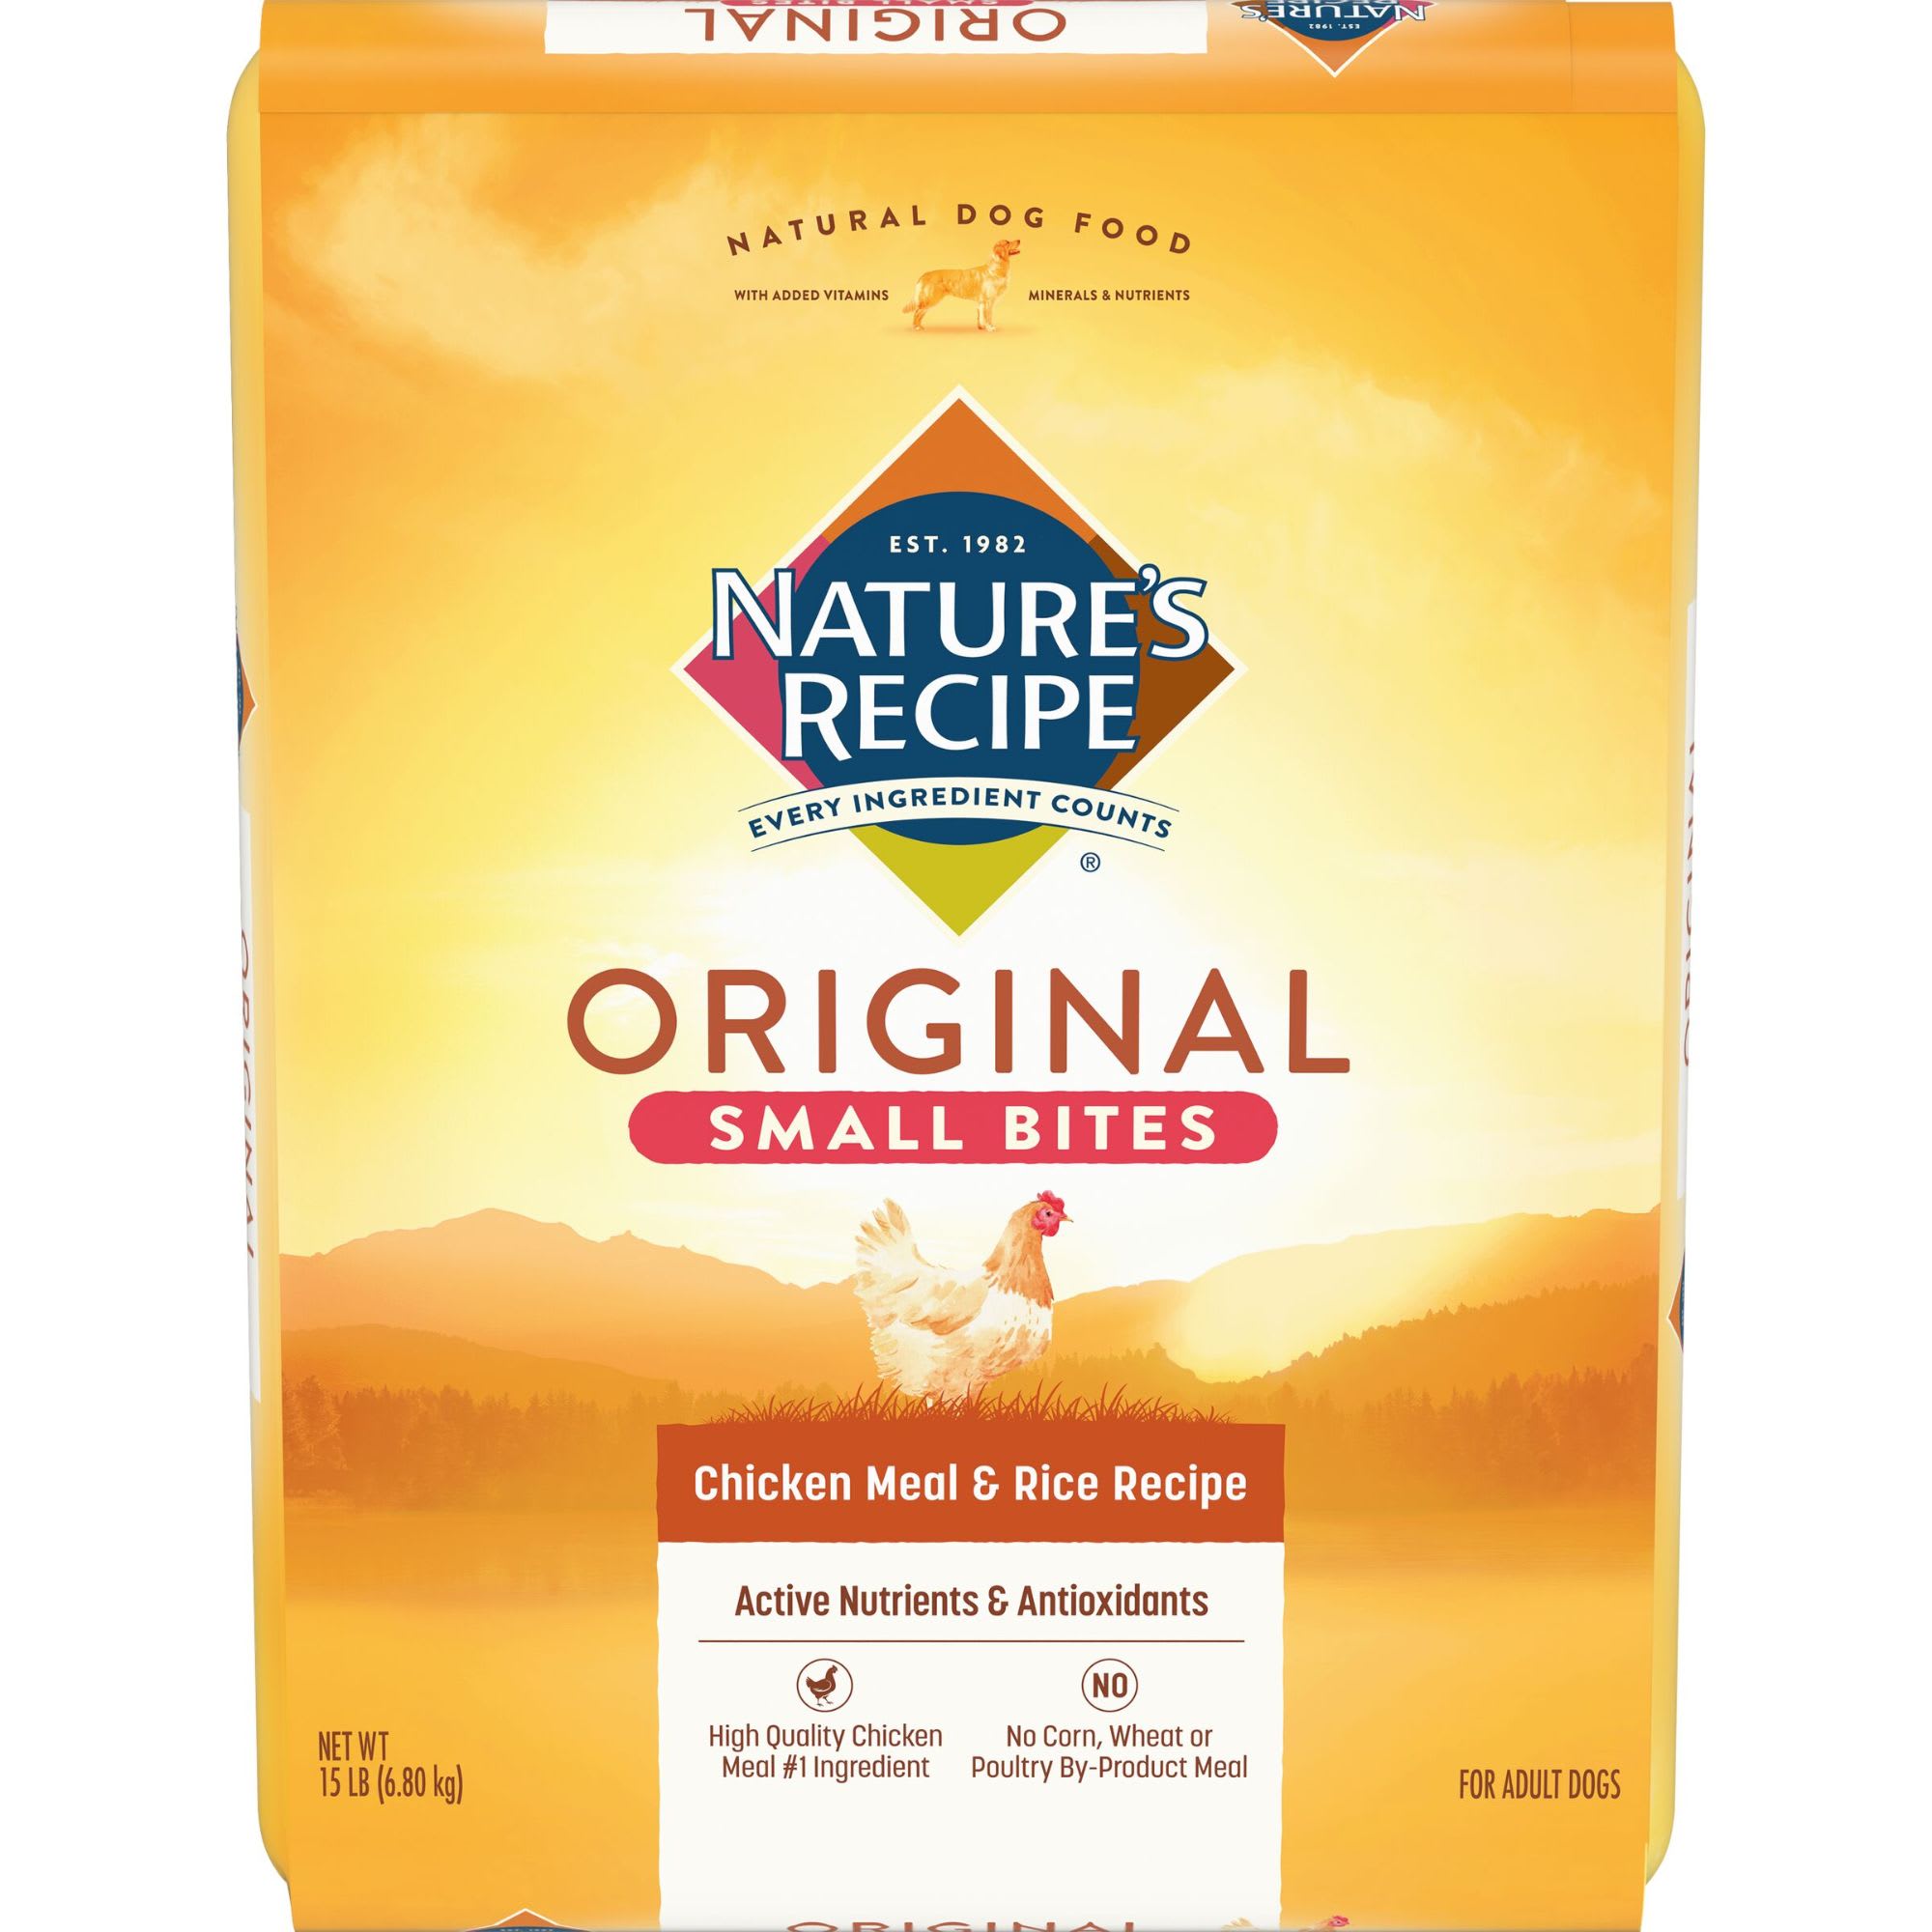 Who Makes Natures Recipe Dog Food